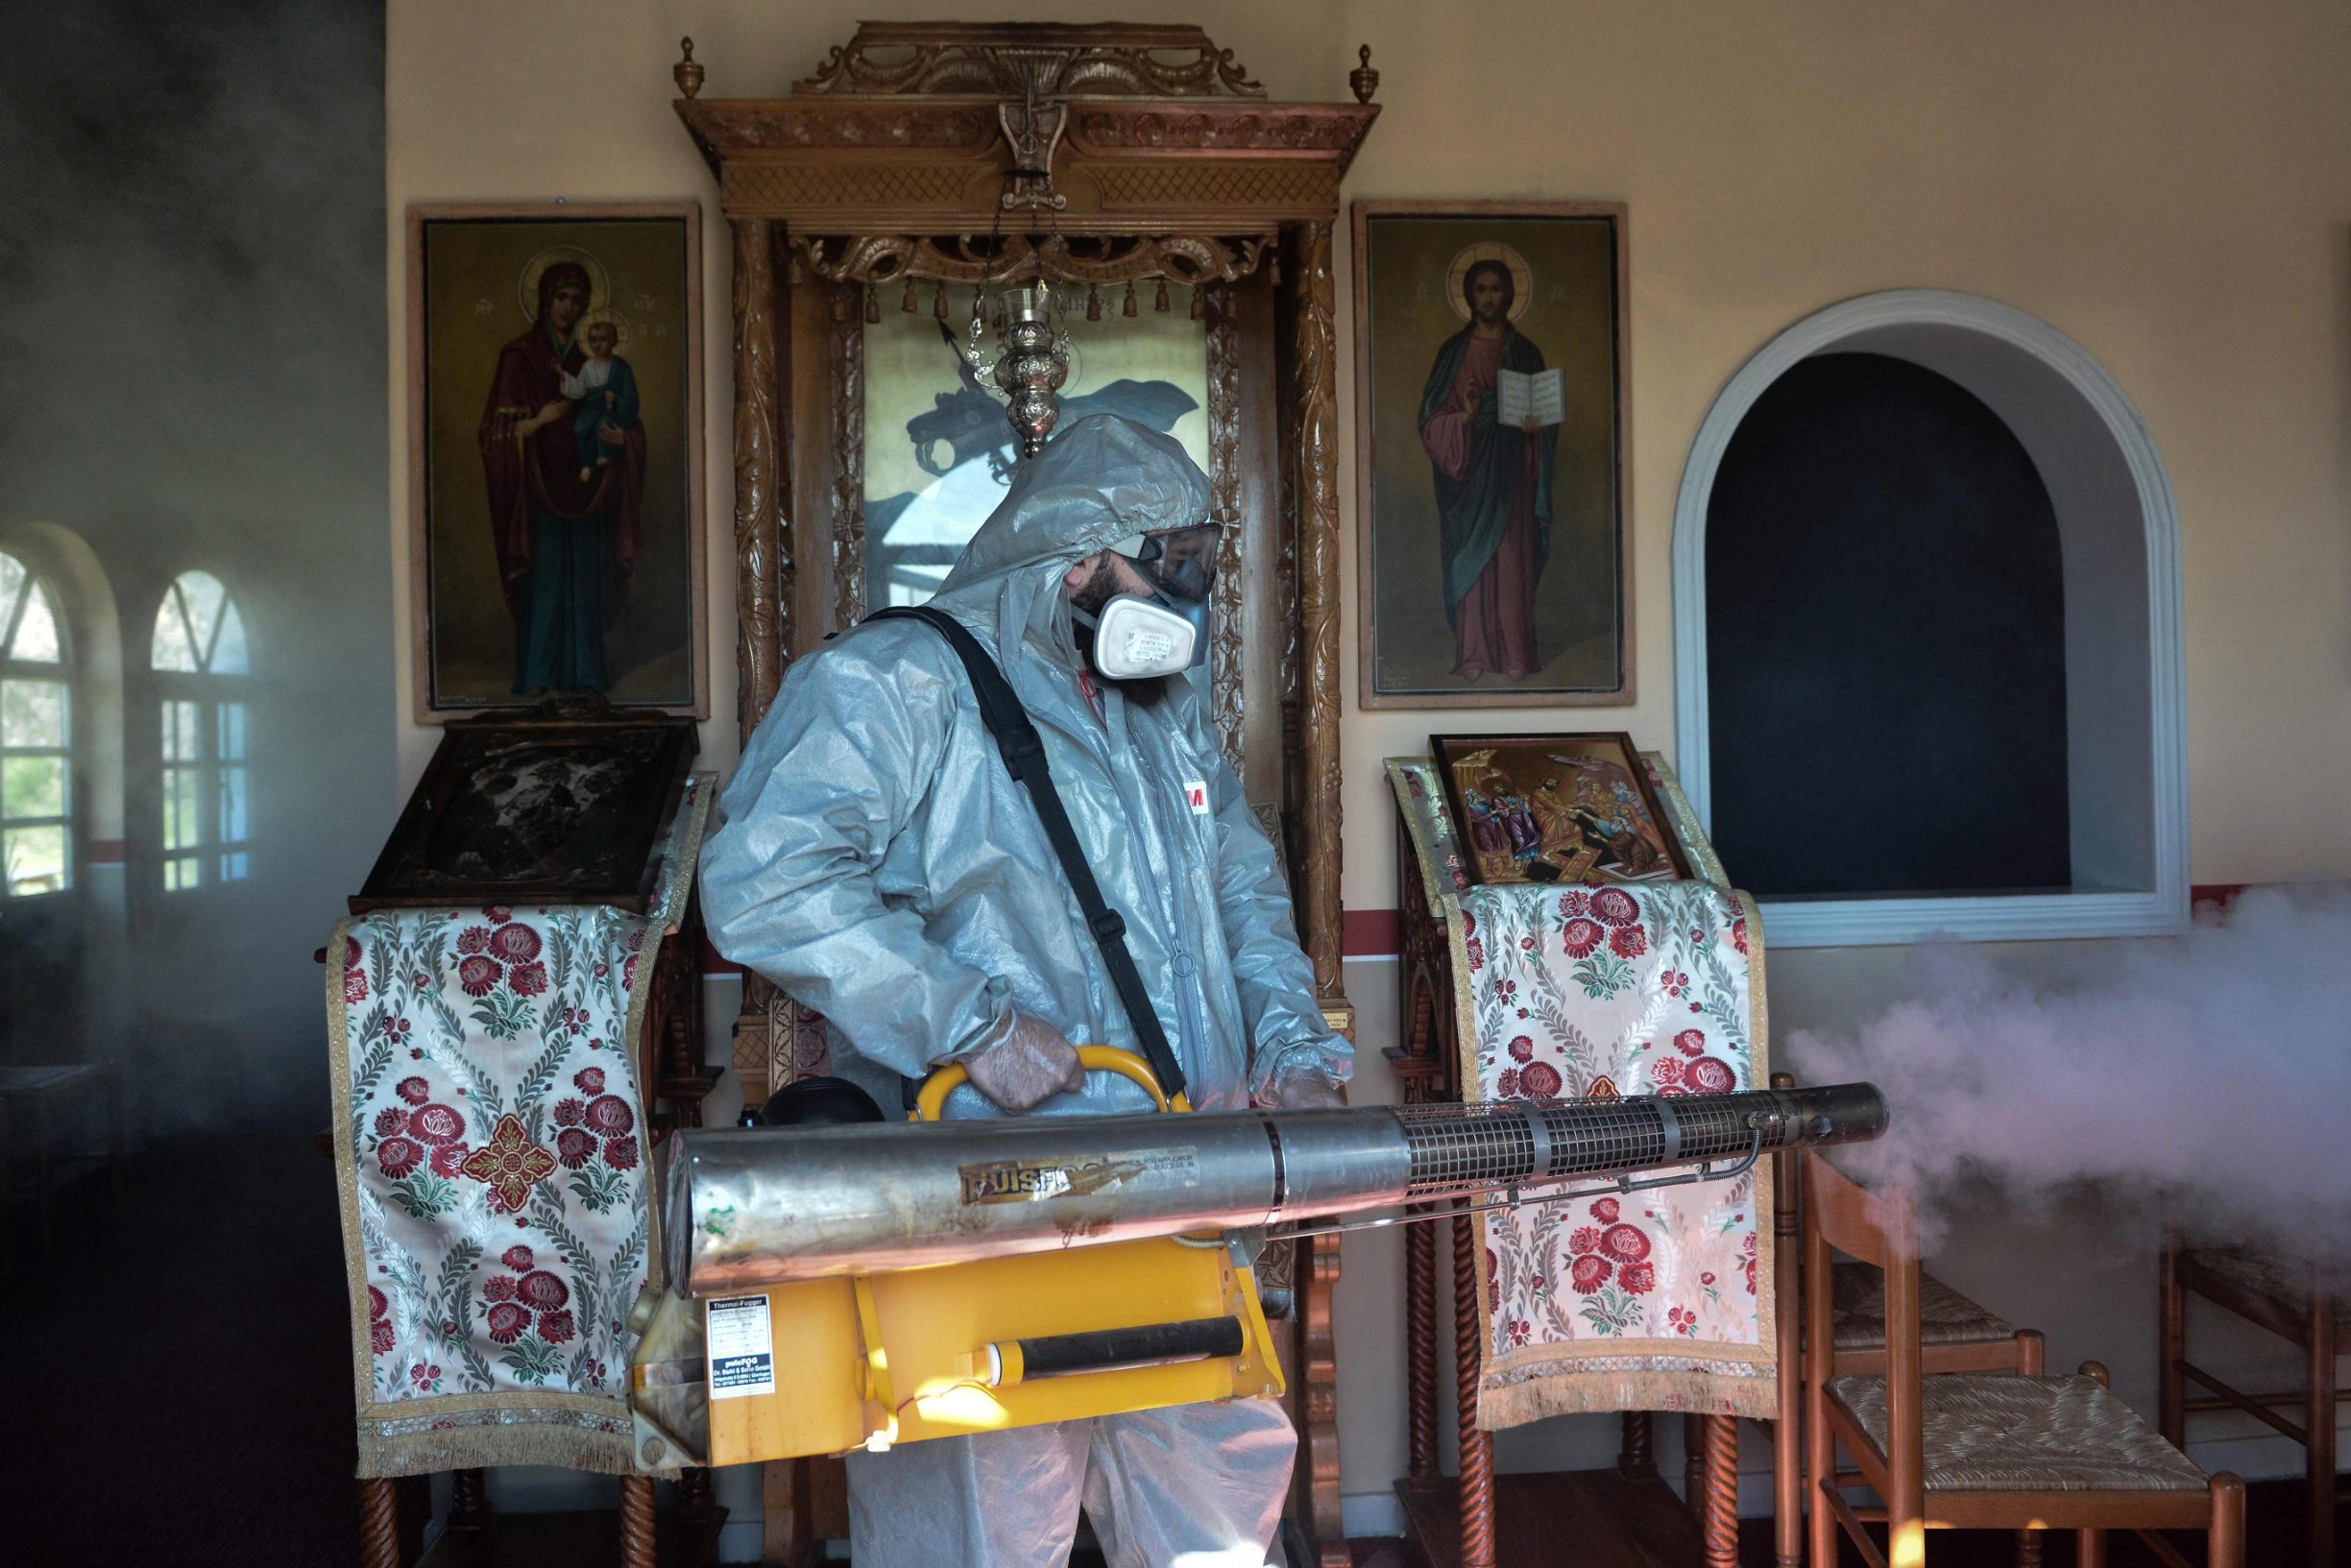 A worker disinfects a church in Thessaloniki on March 12, 2020. - Greece announced on March 12, 2020, its first death from the new coronavirus, a 60-year-old Greek man who traveled to Israel in late February. The majority of the 98 cases of coronavirus in Greece come from this group or from people who have been in contact with these pilgrims. Greece closed all schools, nurseries and universities on Tuesday for two weeks to 